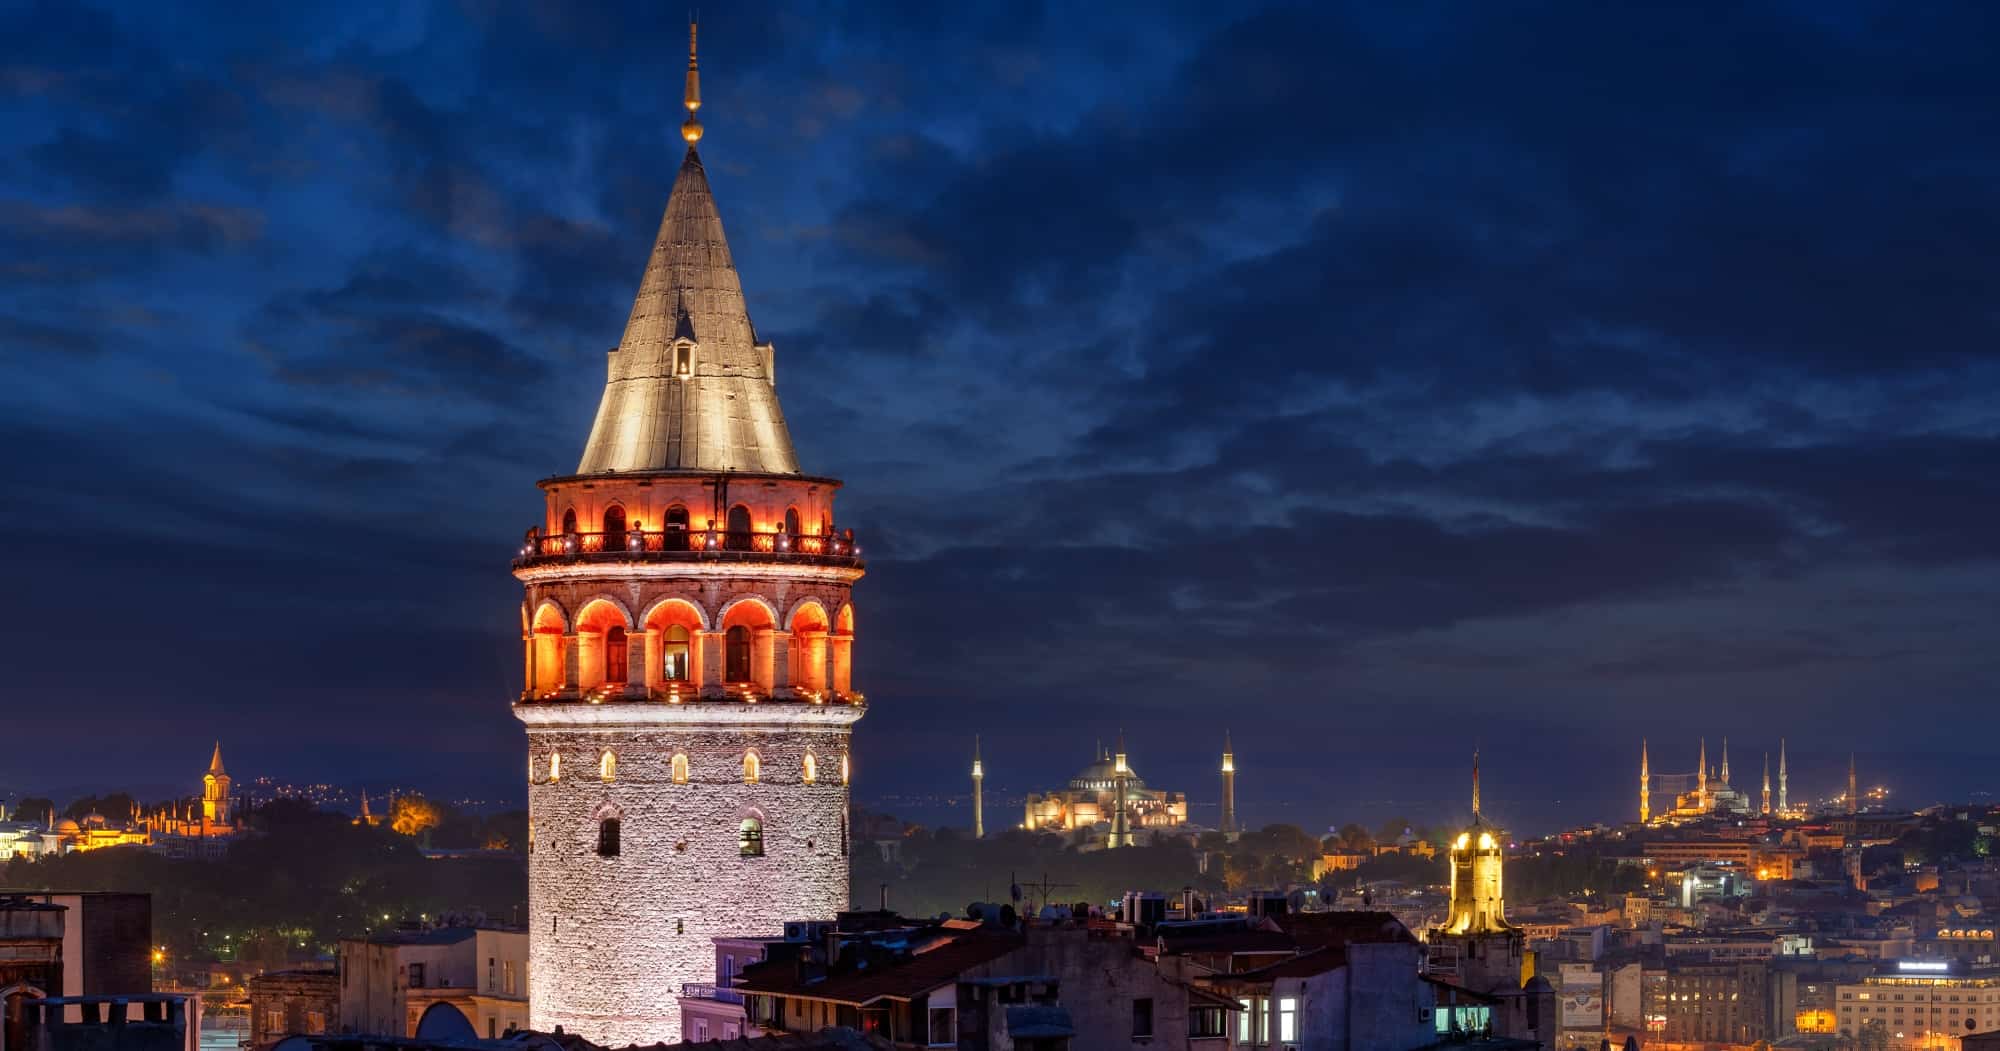 From Pirates to Panoramas: 6 Reasons to Visit the Galata Tower